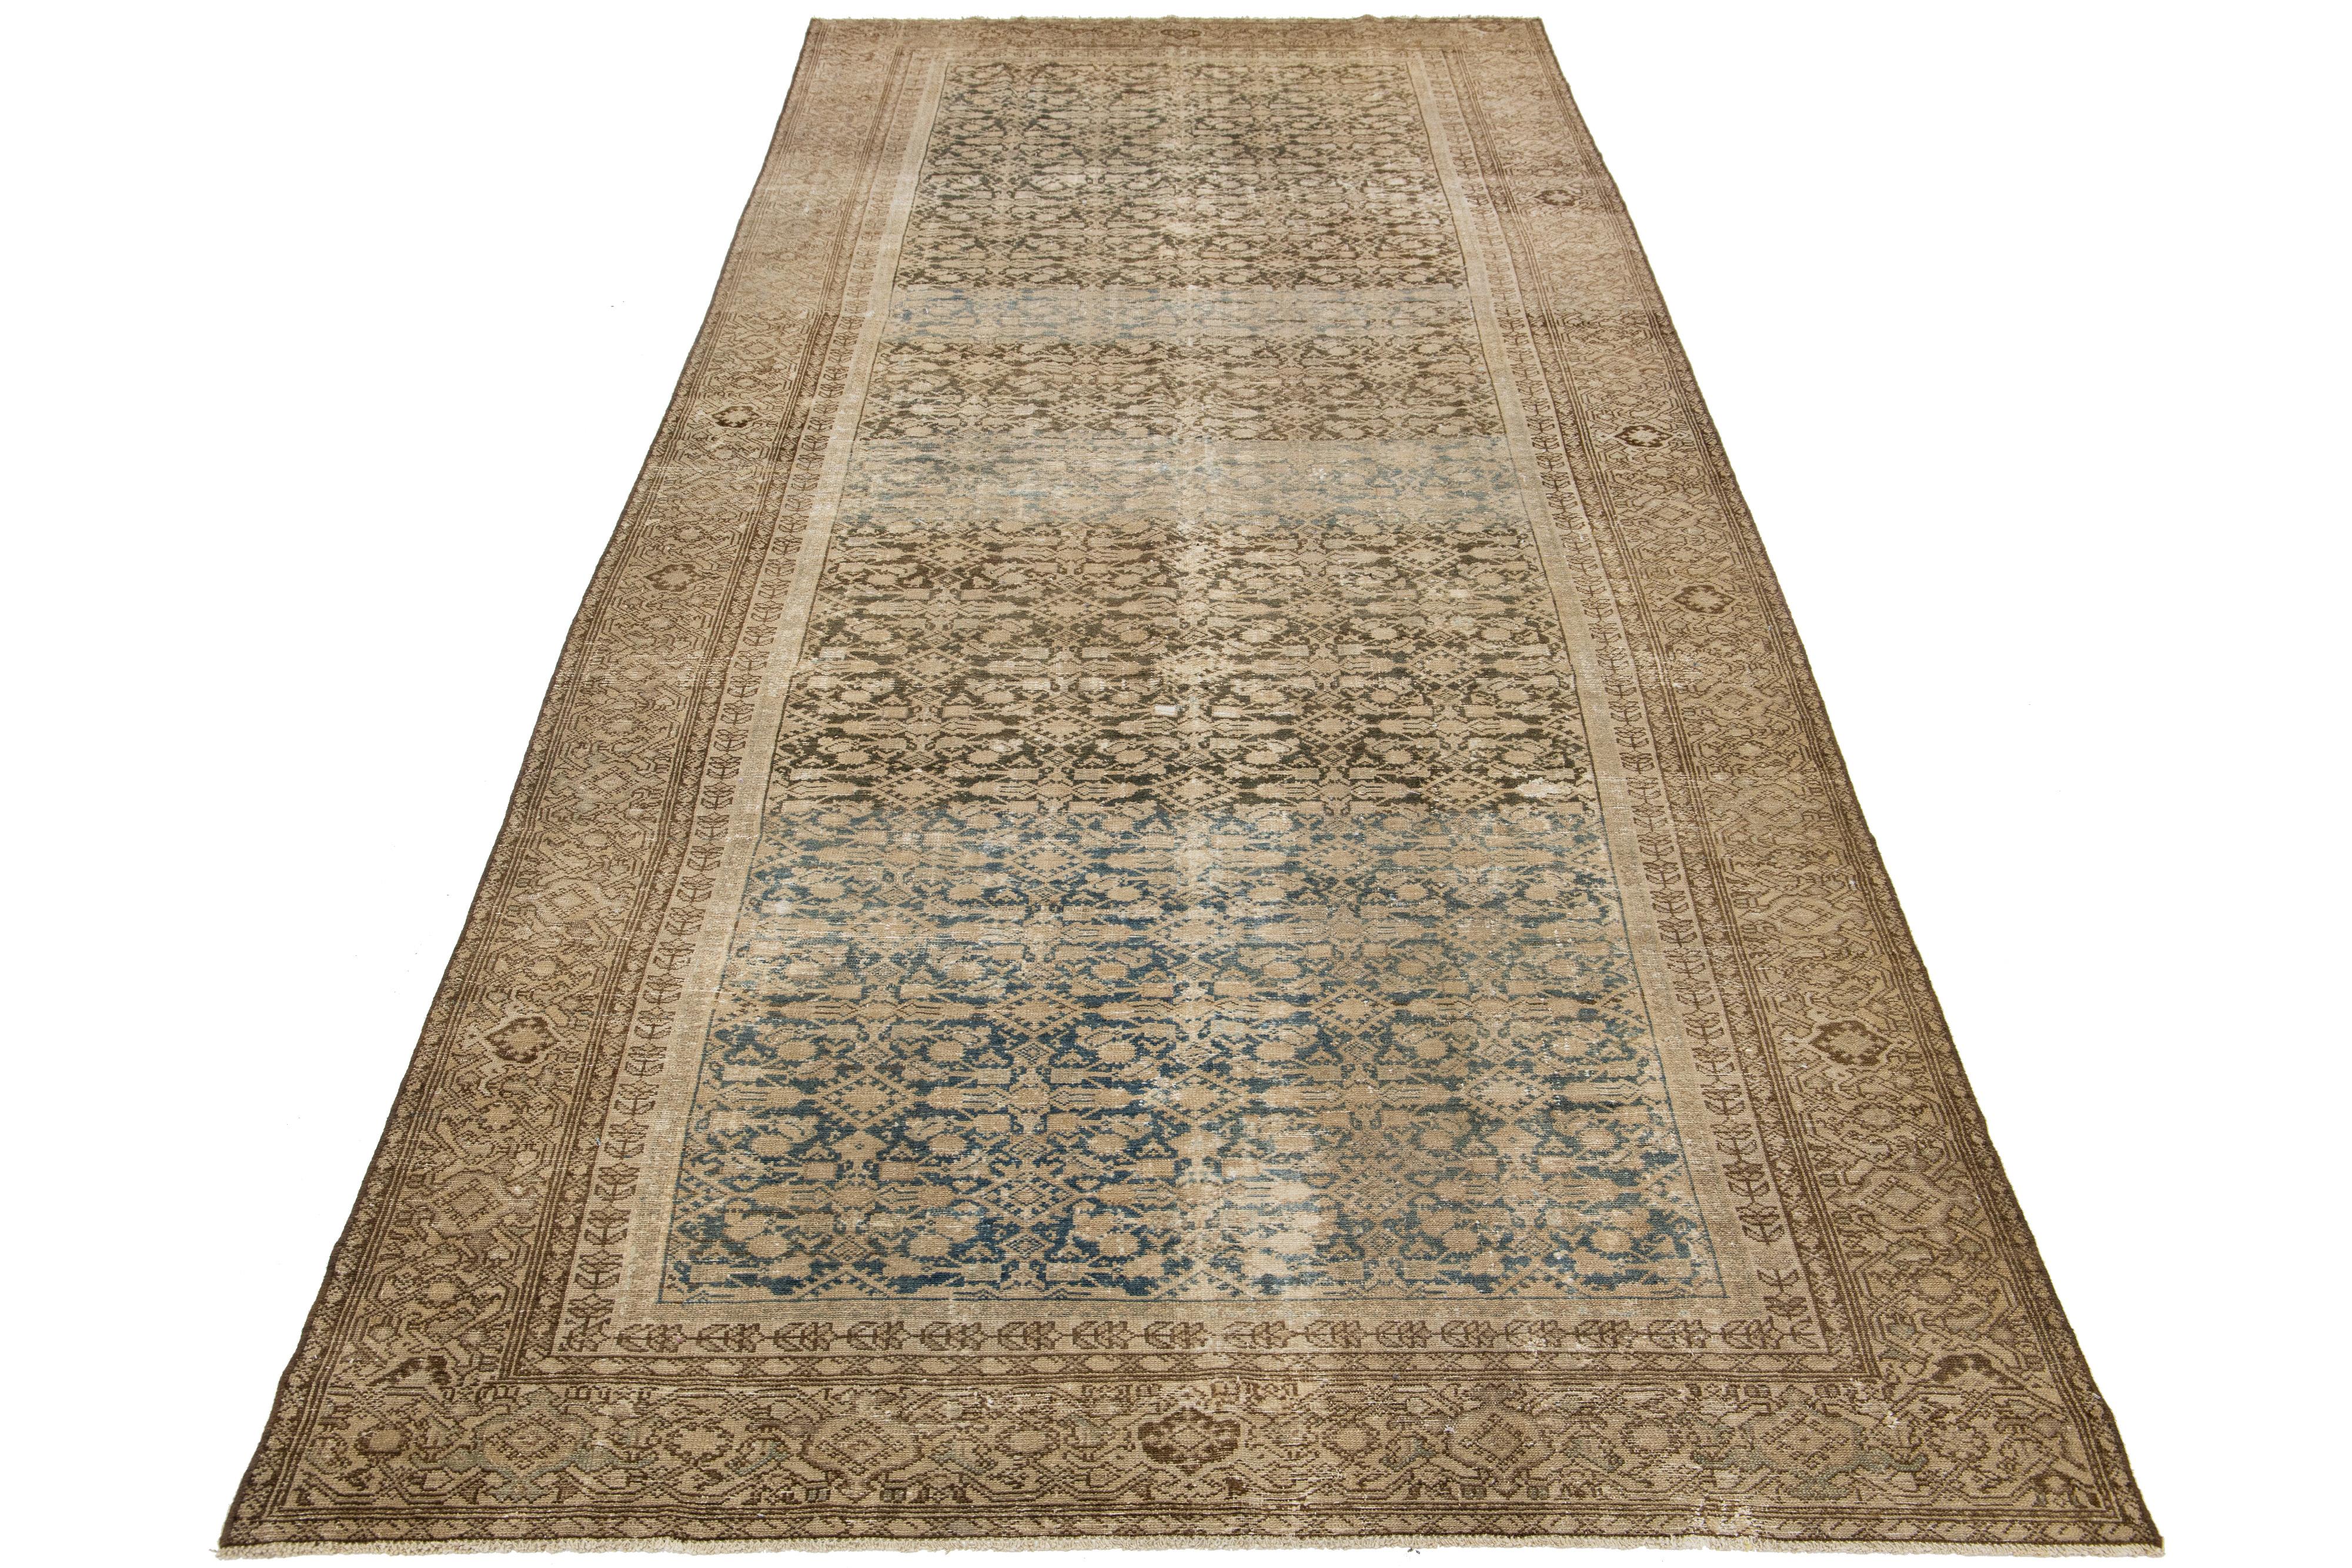 This exceptional antique Persian Malayer rug is crafted from hand-knotted wool. The design features a beautiful combination of beige and brown as the base, enhanced with blue highlights in a stunning and intricately detailed classical floral